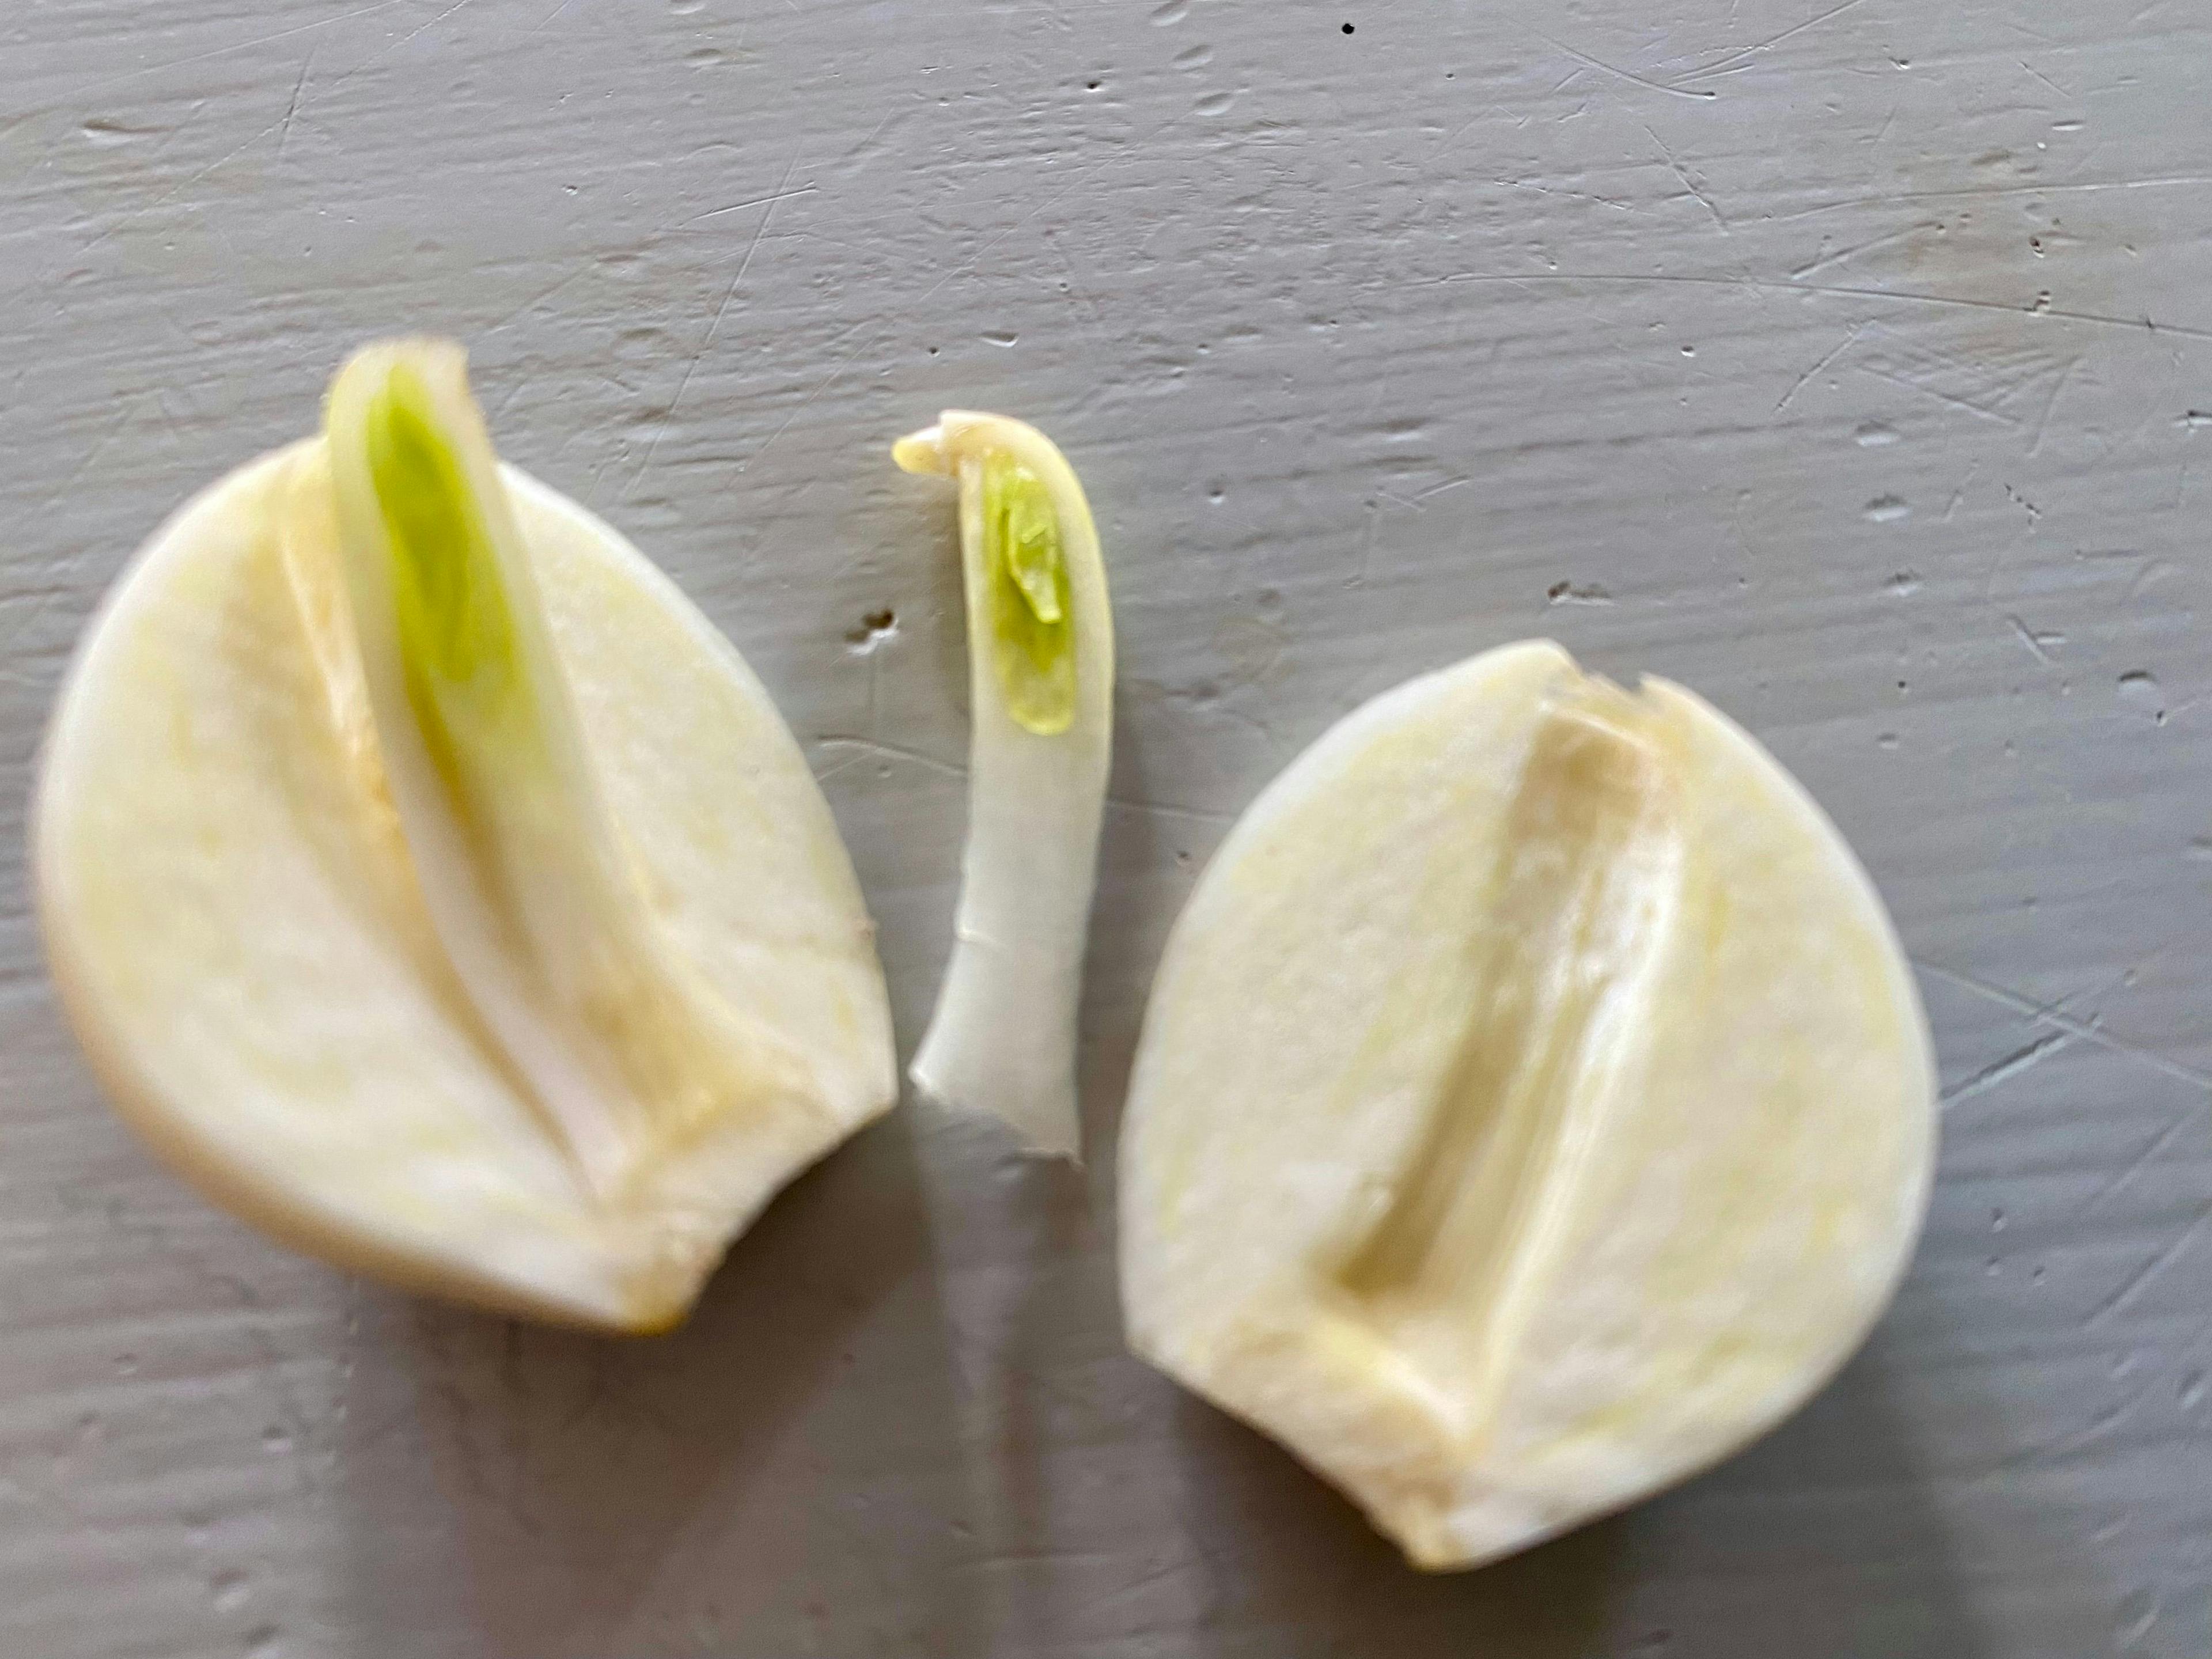 halved garlic cloves with inner part removed